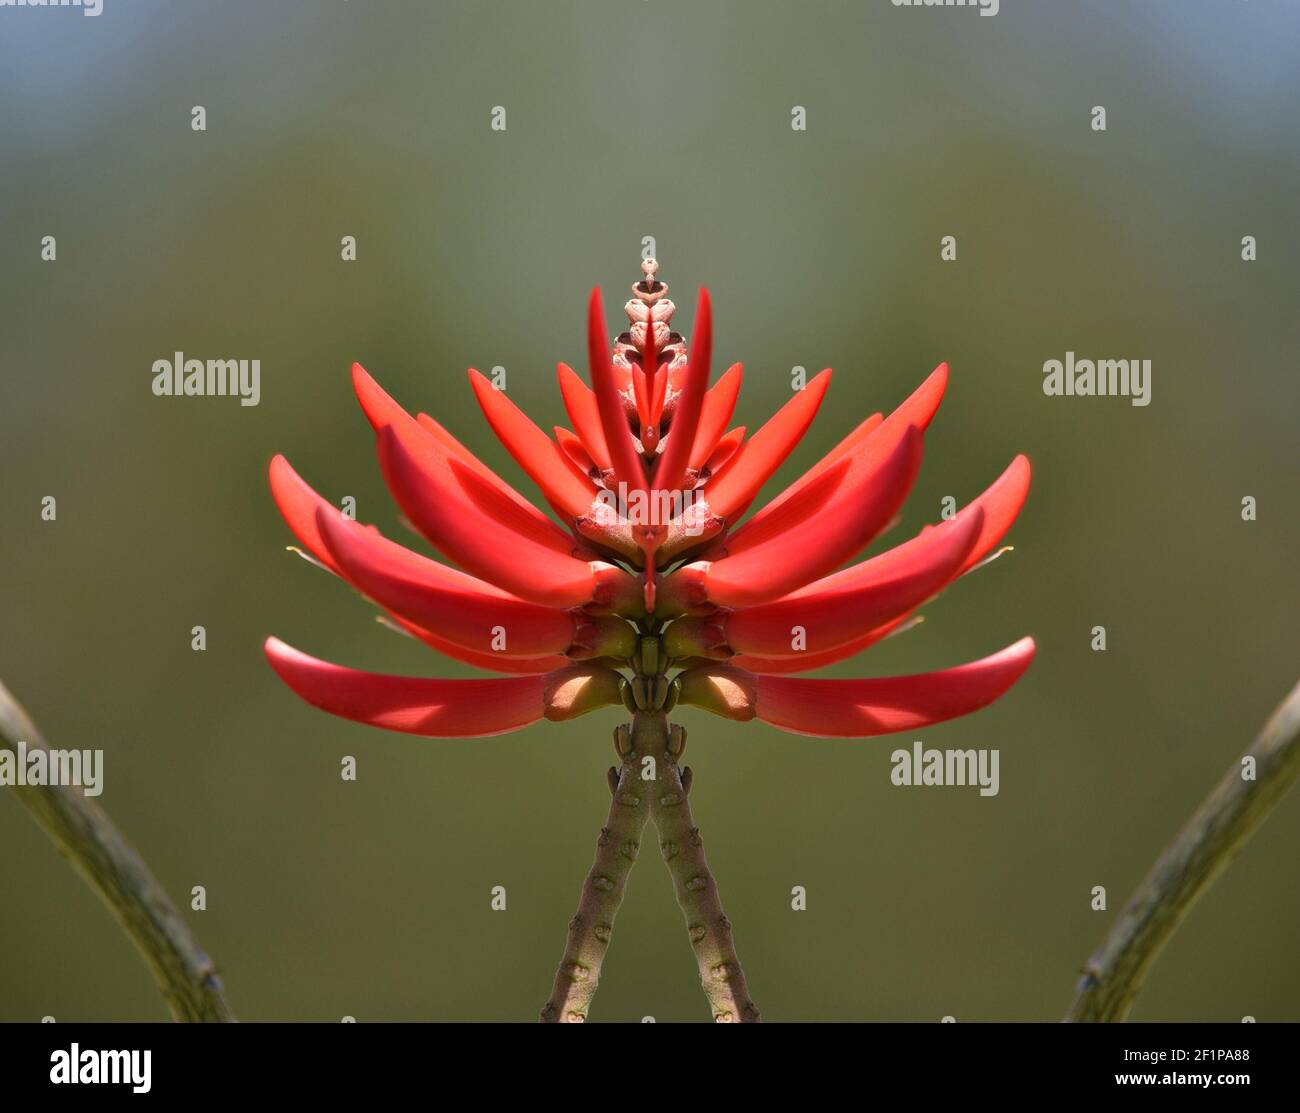 Erythrina speciosa (Coral tree) a tropical plant with vibrant coral-orange flower spikes on an abstract composition. Stock Photo